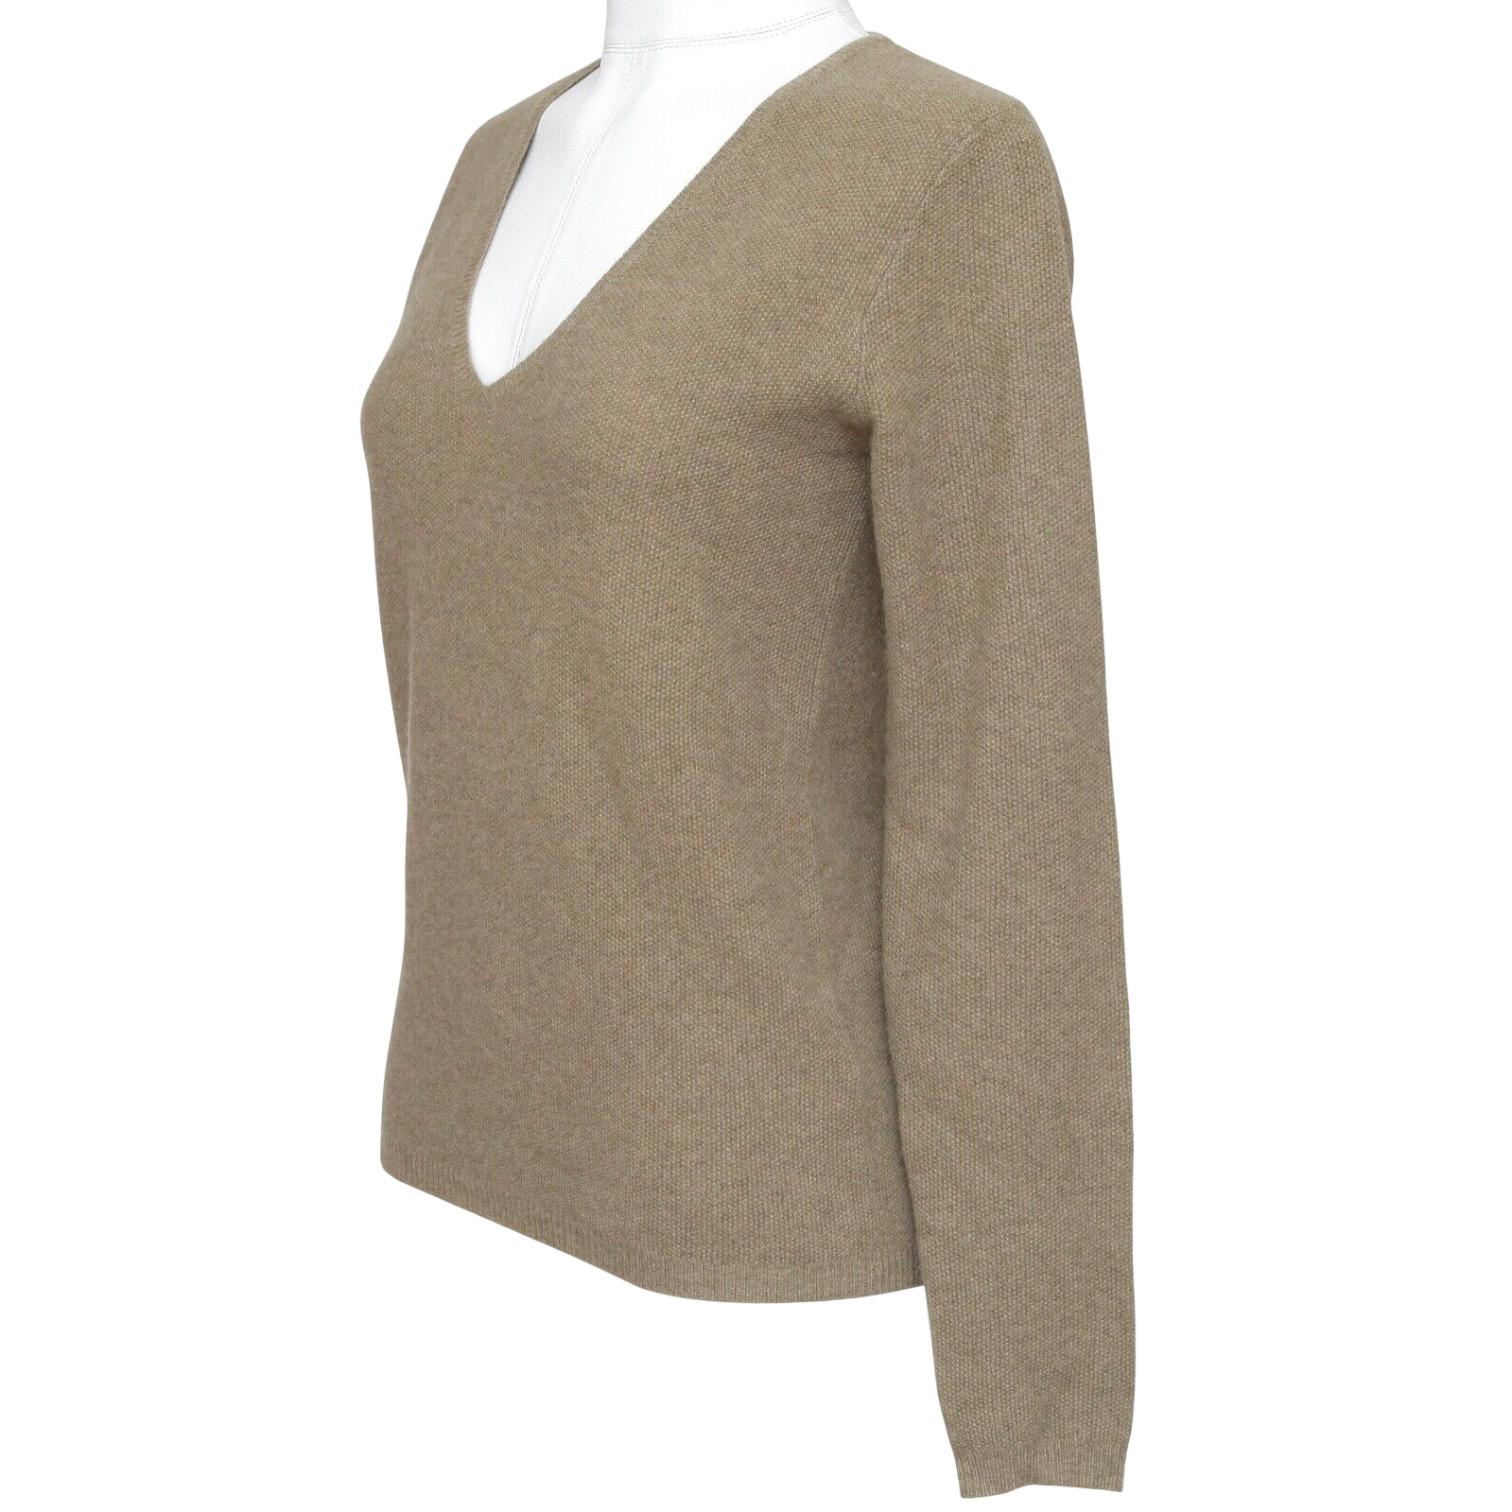 Brown CHLOE Sweater Knit Top Shirt Long Sleeve Cashmere Mossy Green V-Neck XS For Sale